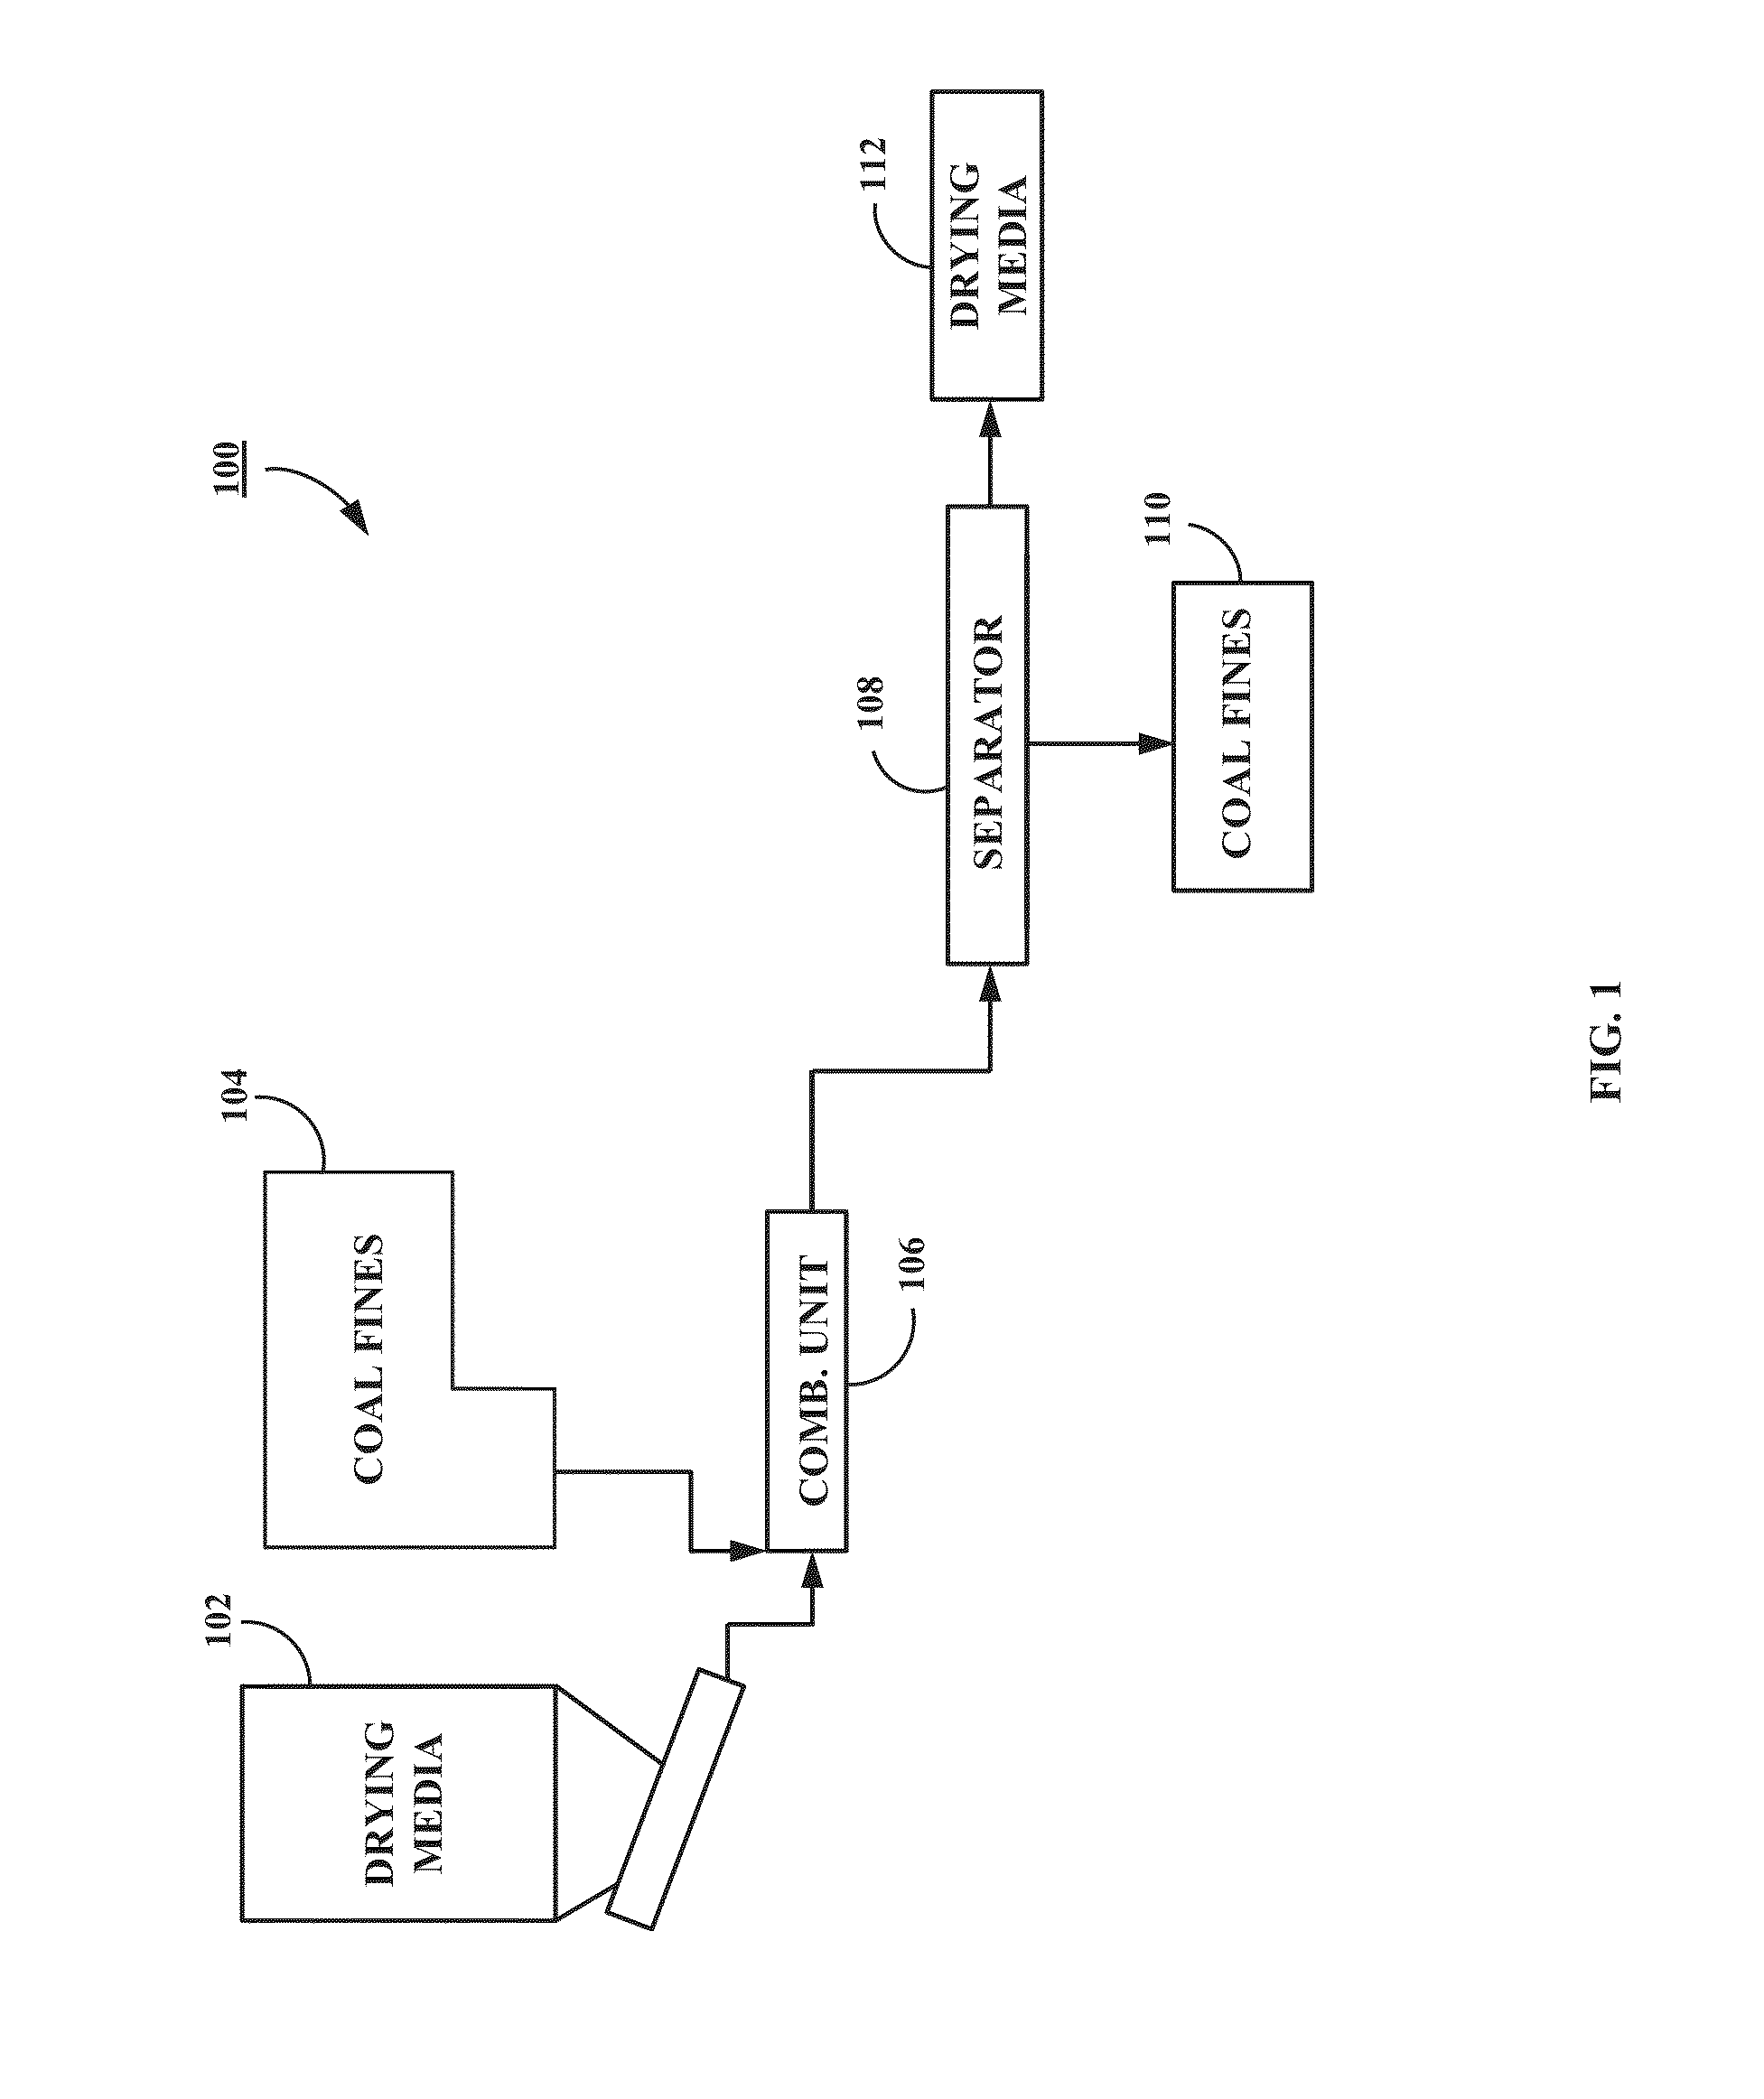 Coal drying method and system